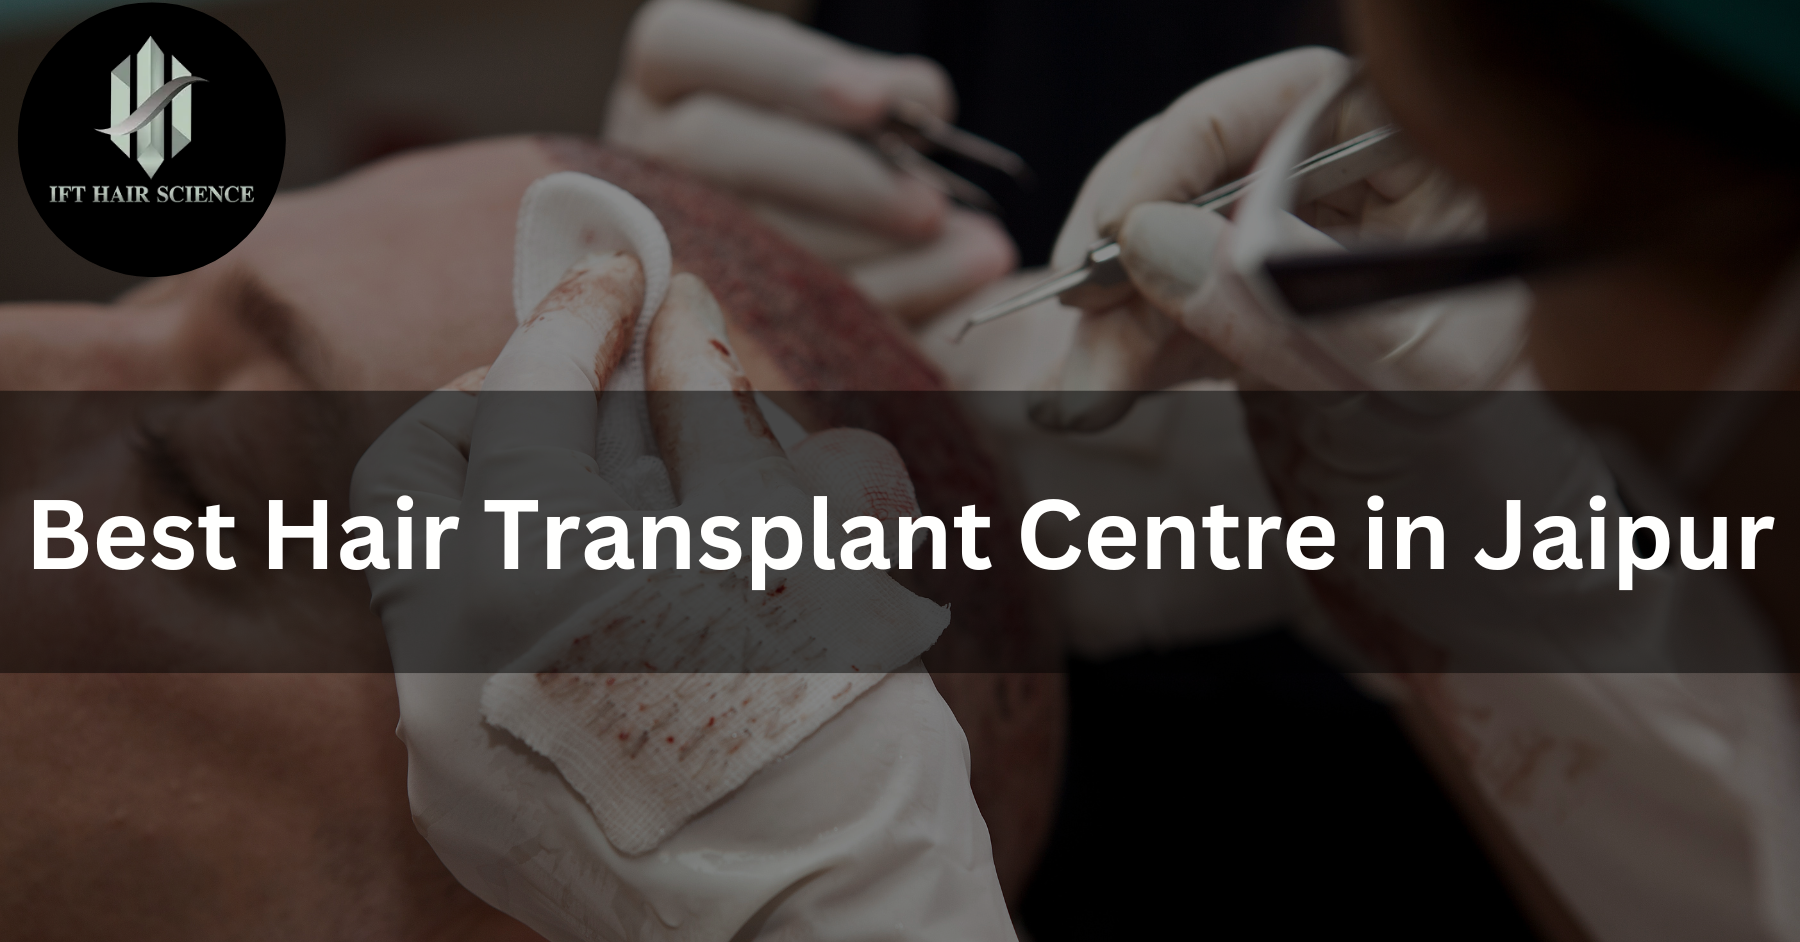 Which is the Best Hair Transplant Centre in Jaipur?